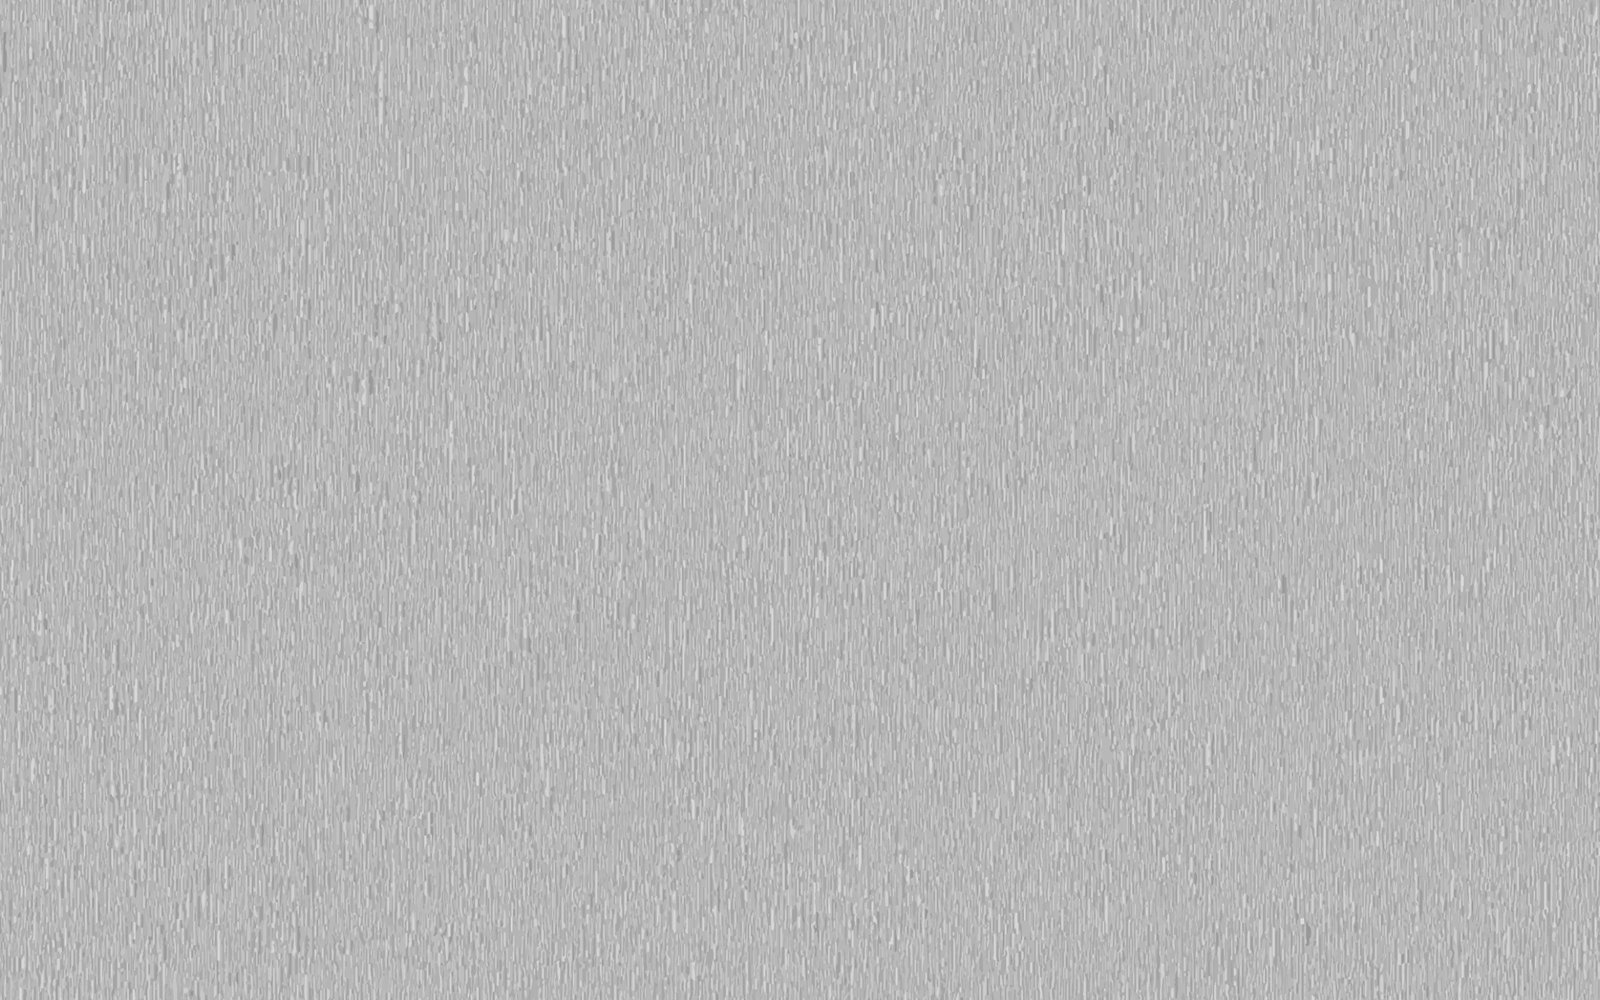 Abstract White Grunge Background Texture